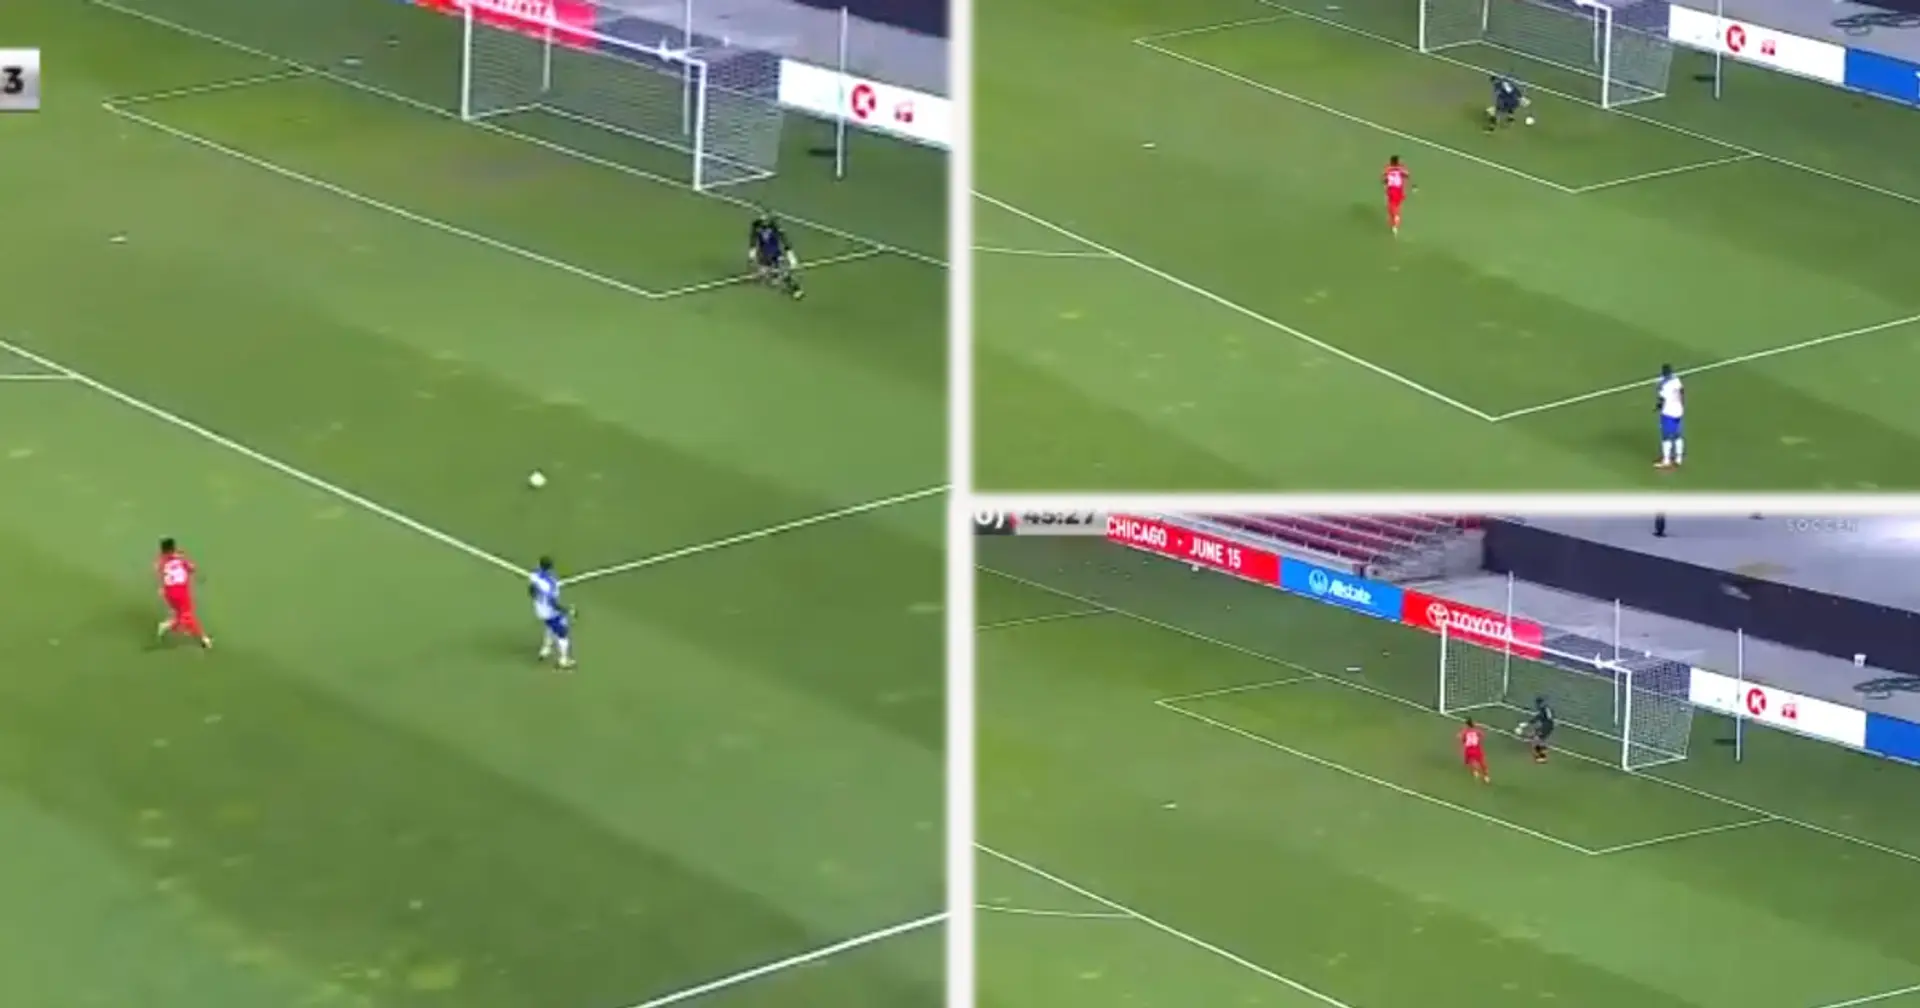 Haiti goalkeeper scores the worst own goal of all time against Canada